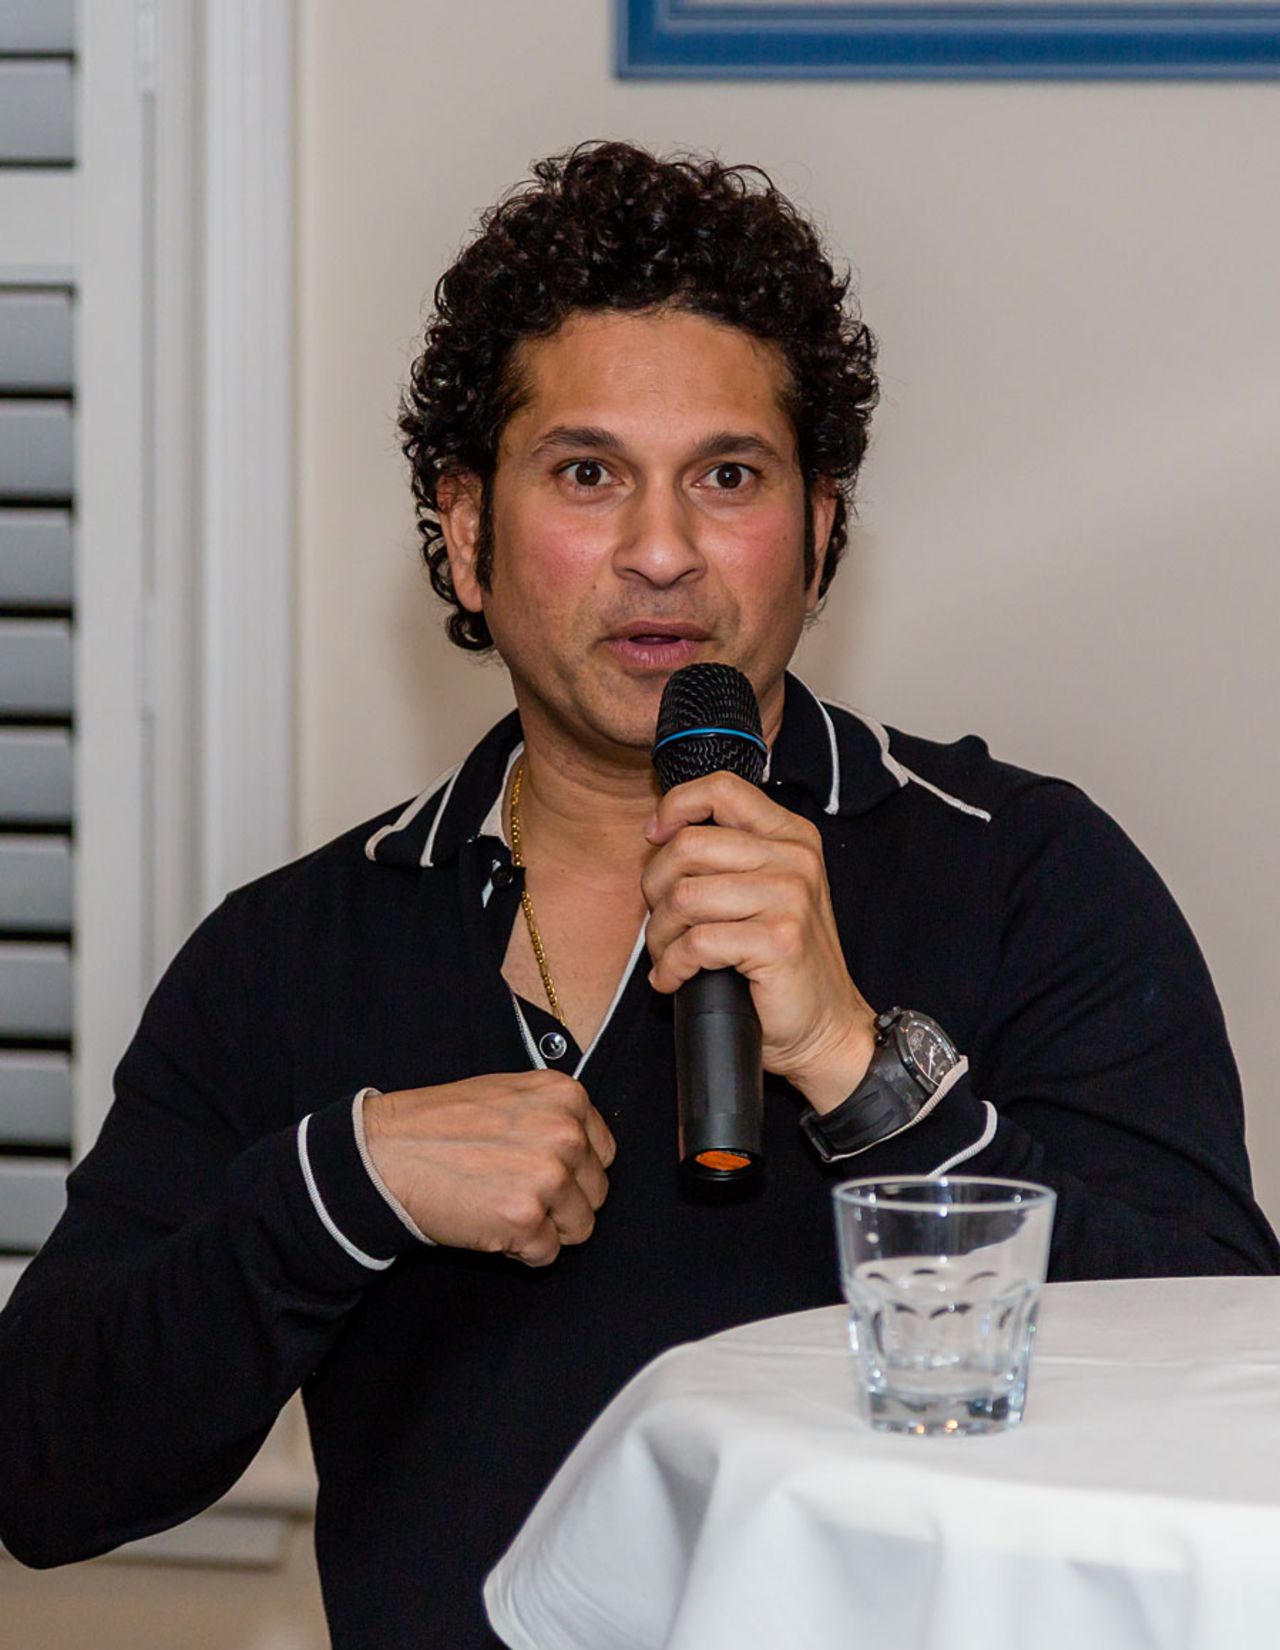 Sachin Tendulkar gave his views on the future of the World Cup at an event in Sydney, March, 2, 2015